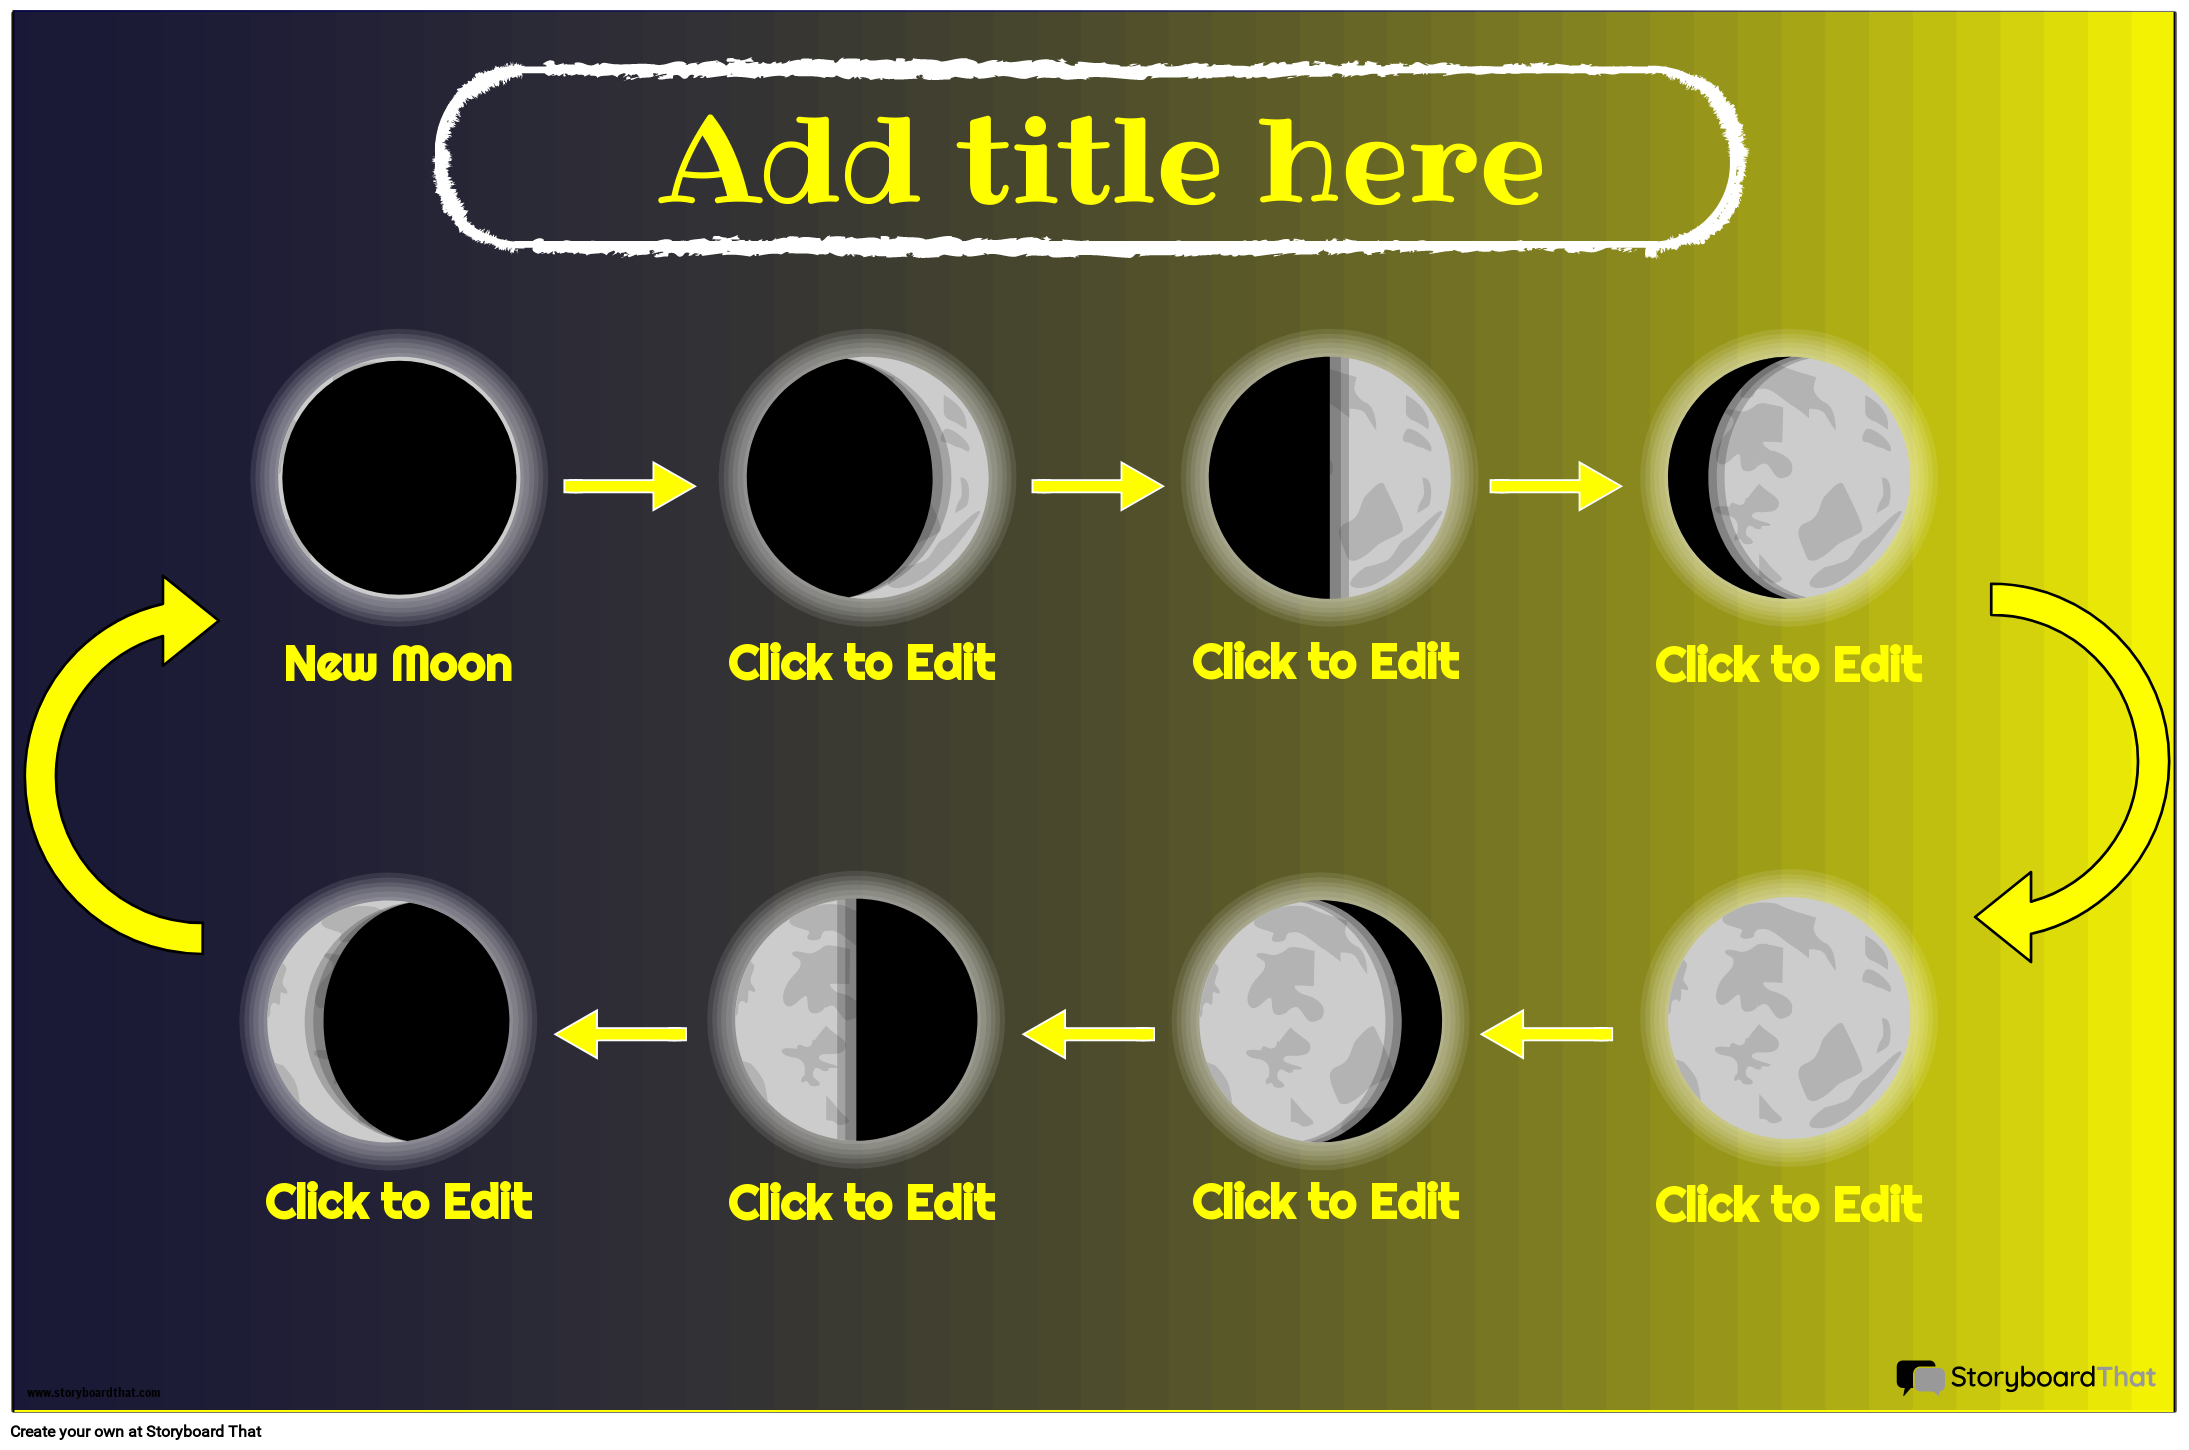 Moon Cycle Poster  Heritage Language Resource Center